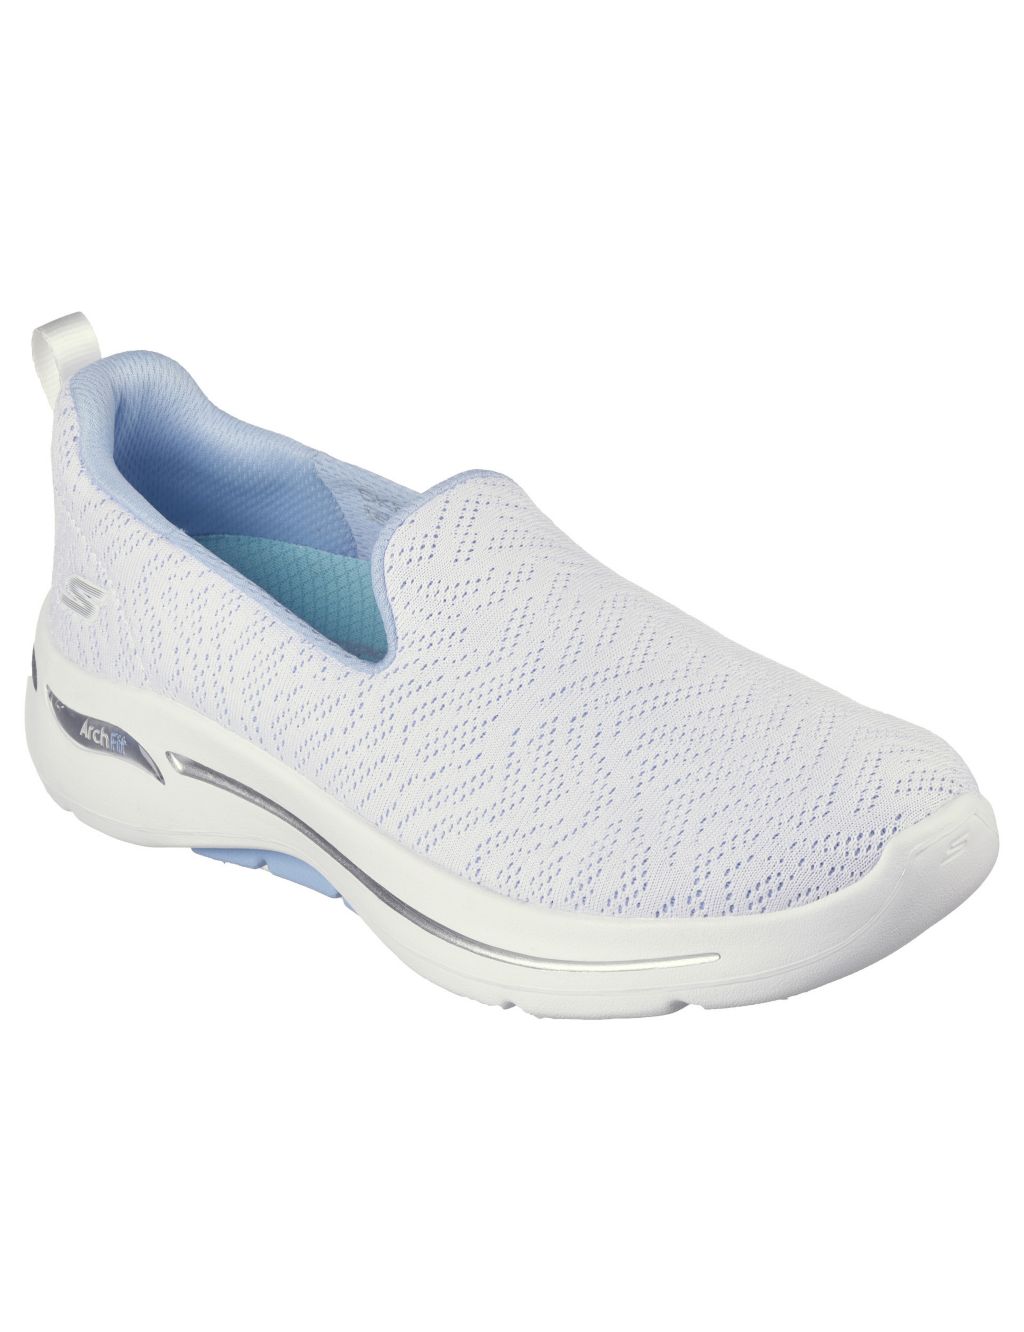 GOwalk Arch Fit Ocean Reef Knitted Trainers image 2